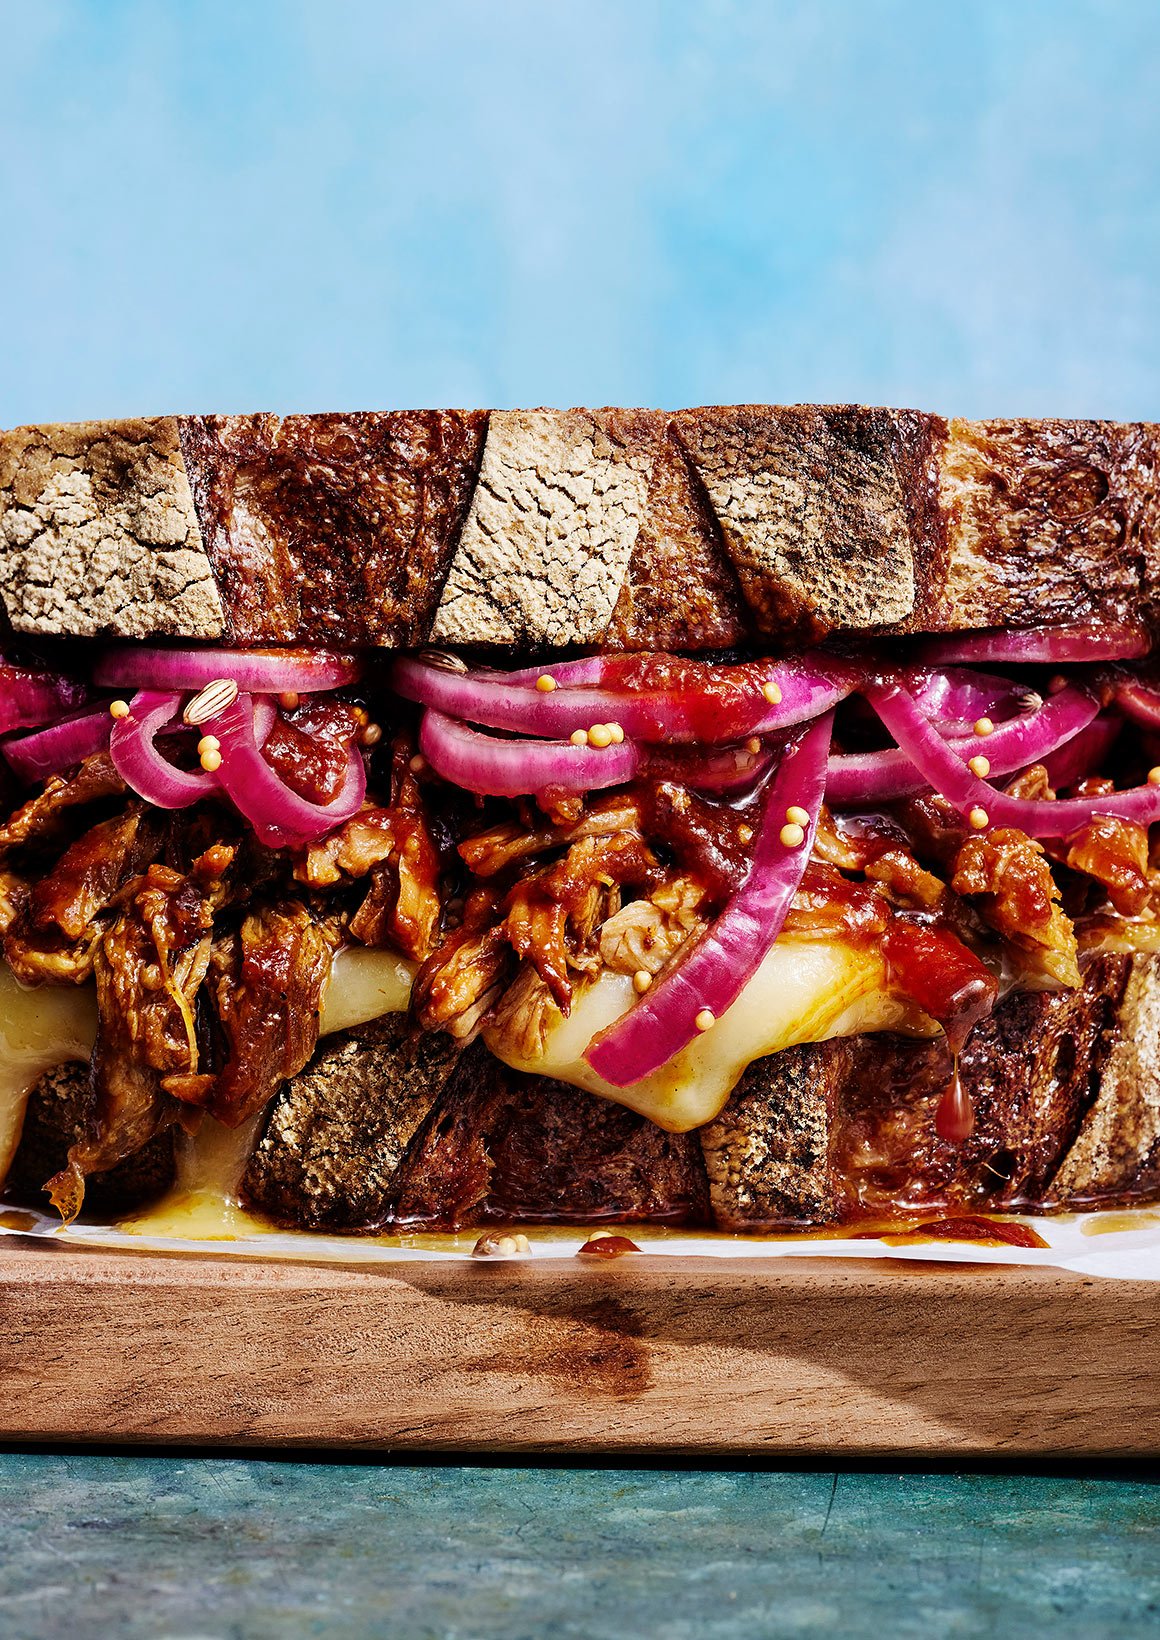 Shaquille-Oneal-Recipe-cookbook-Family-stlye-Pulled-Porksandwhich-8449.jpg